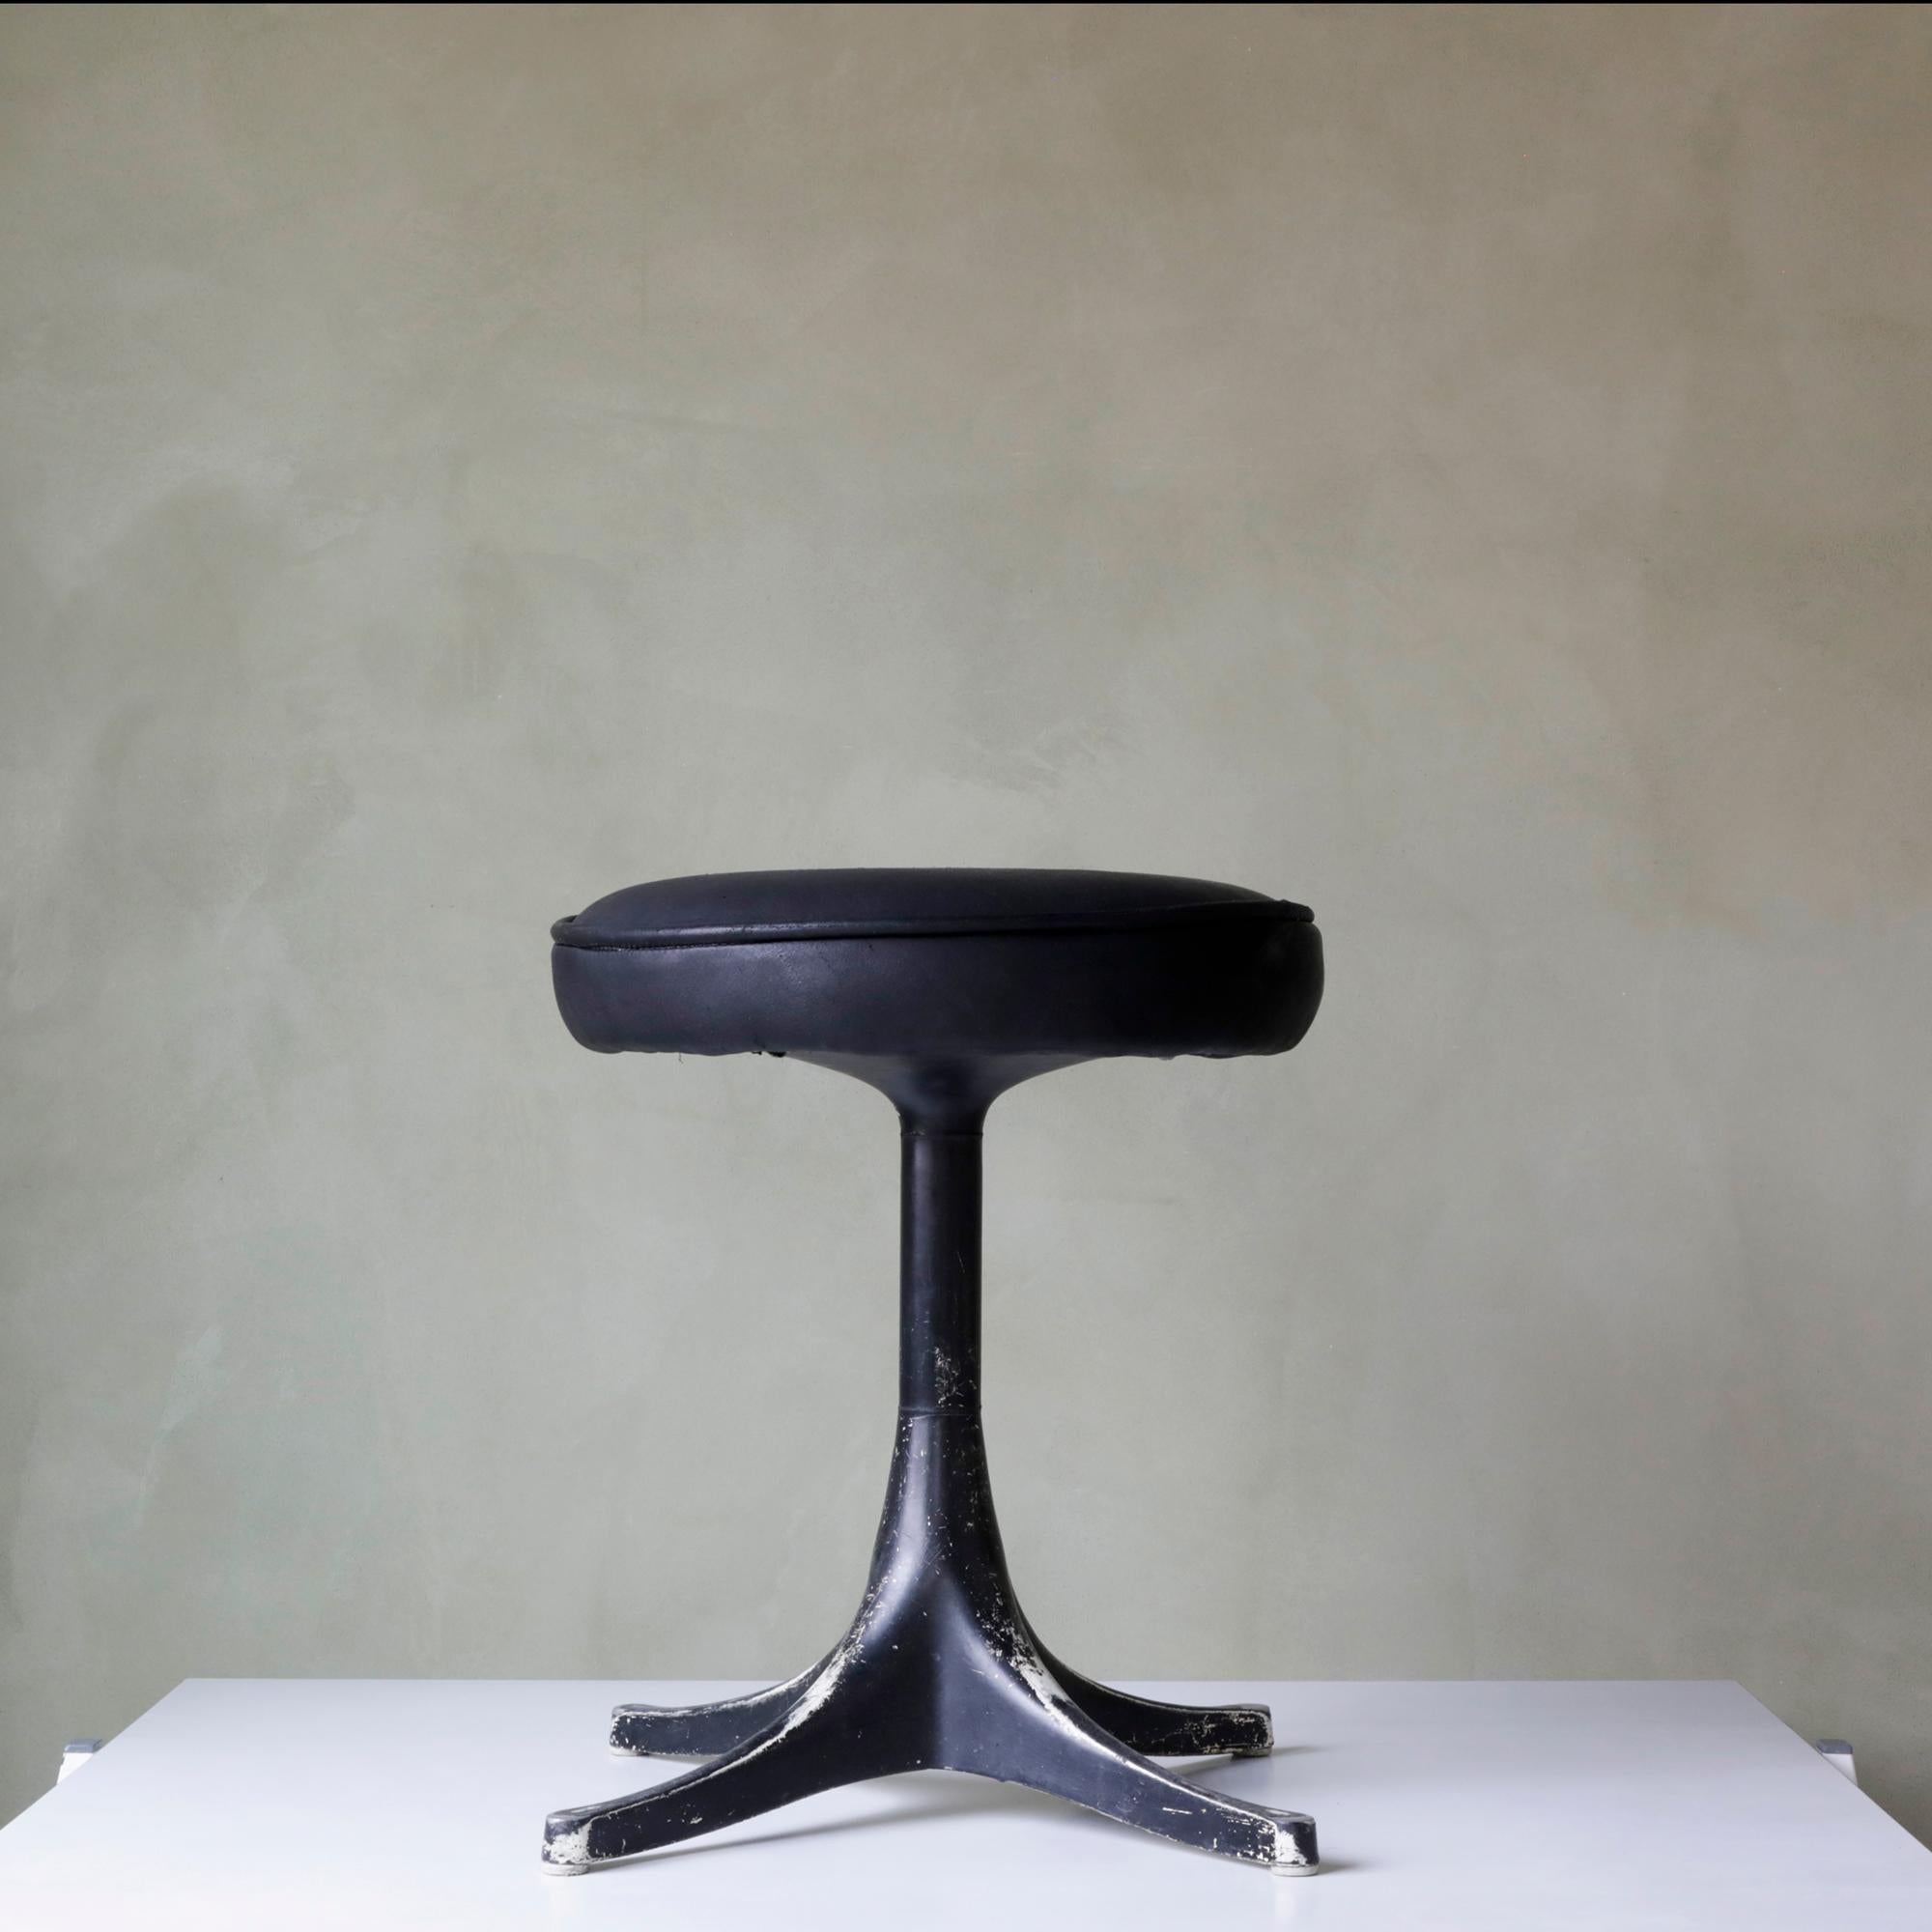 Early example of a cast-aluminum swag leg pedestal stool designed by George Nelson for Herman Miller. Great patina on the base showing nice wear in contrast to the new foam and black deerskin upholstery. This stool is ready for use and a great